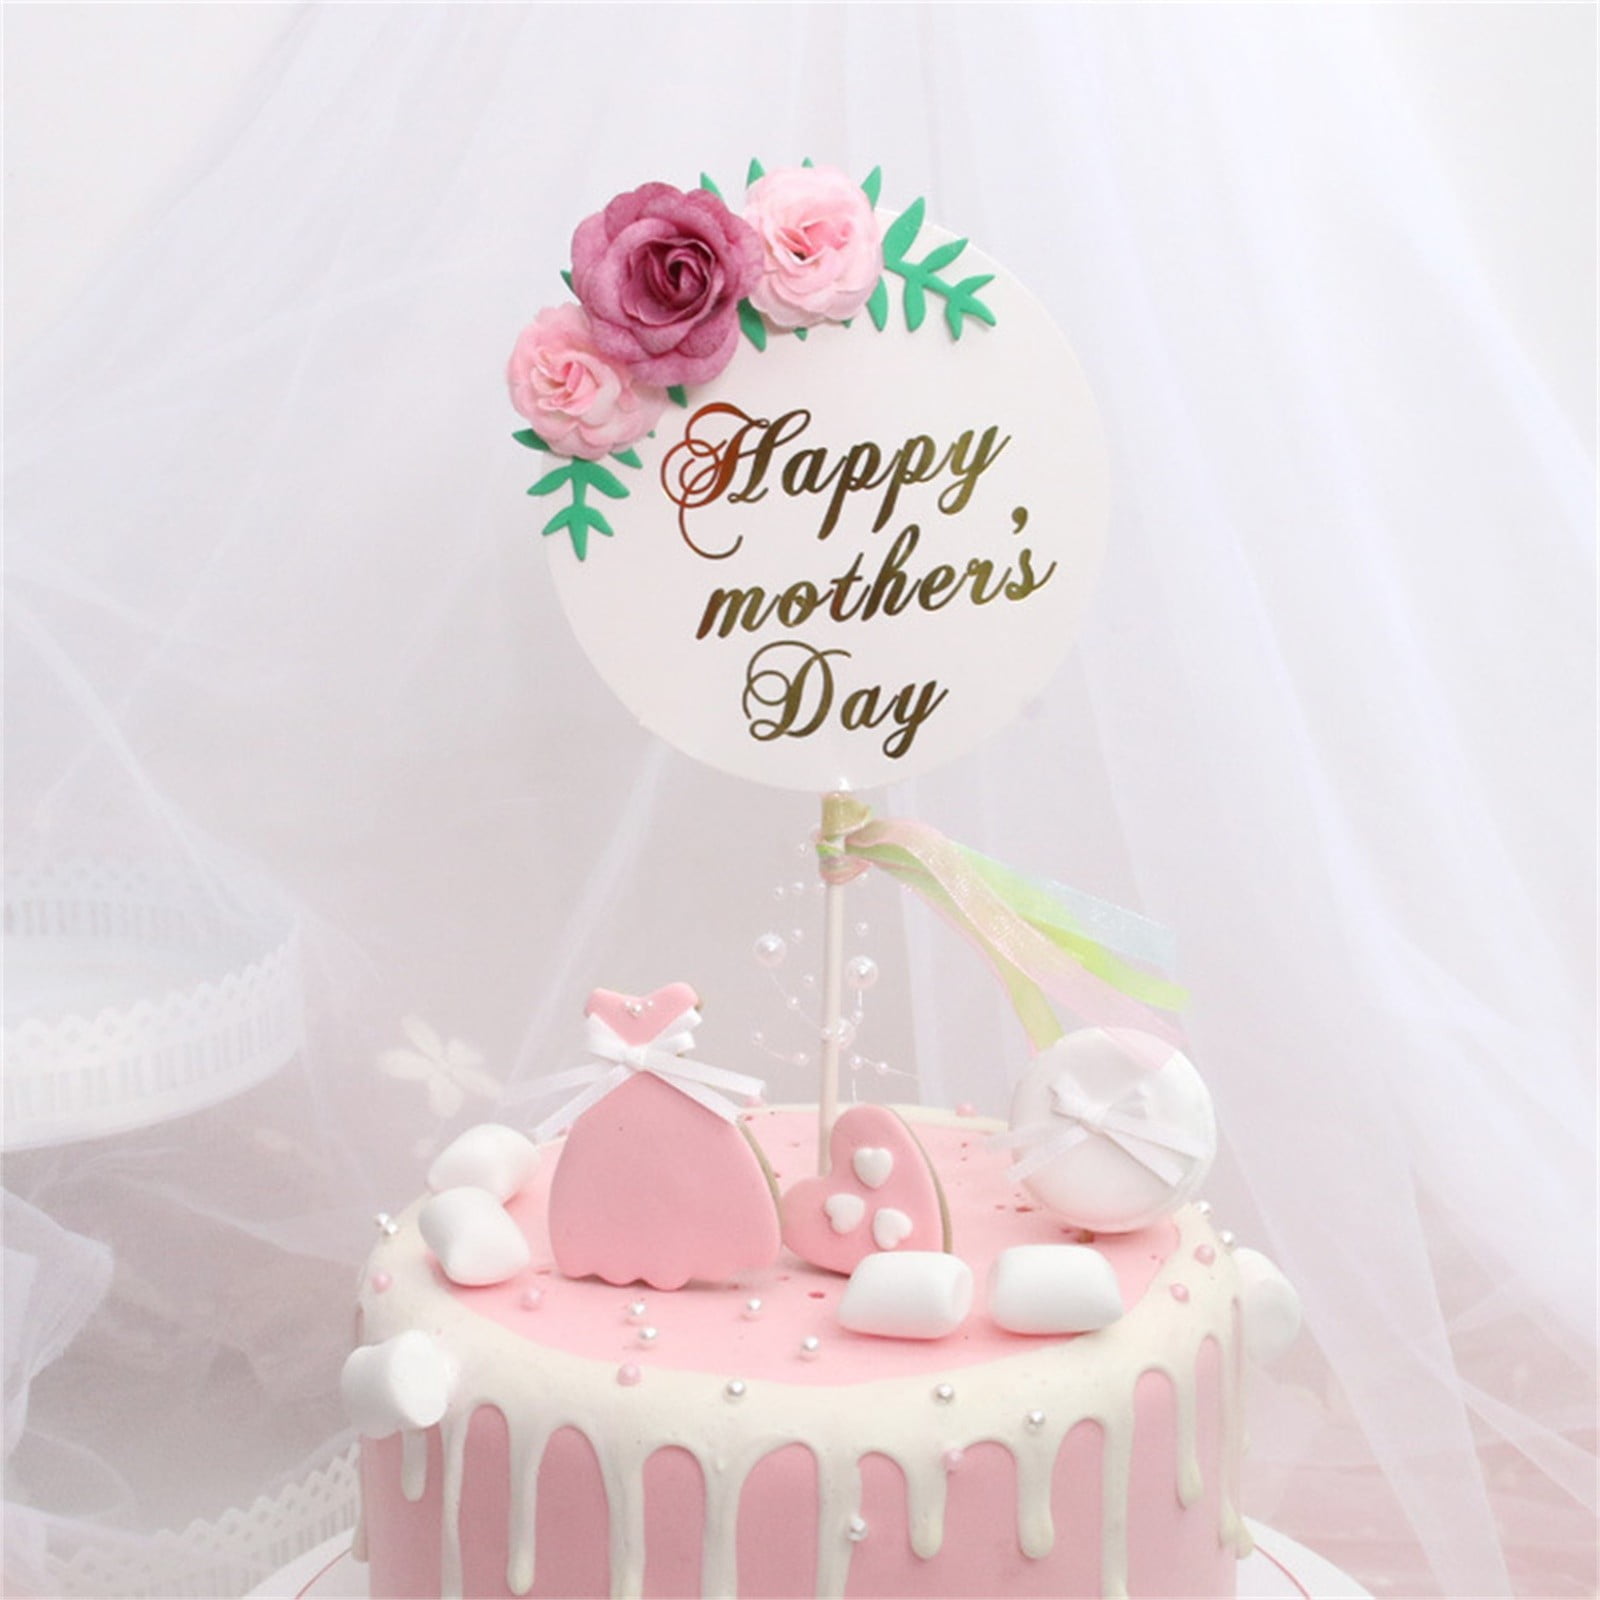 Party Cake Decor for Mother Happy Mothers Day Party Cake Decorations Proud Mom of The 2021 Graduate Cake Topper 